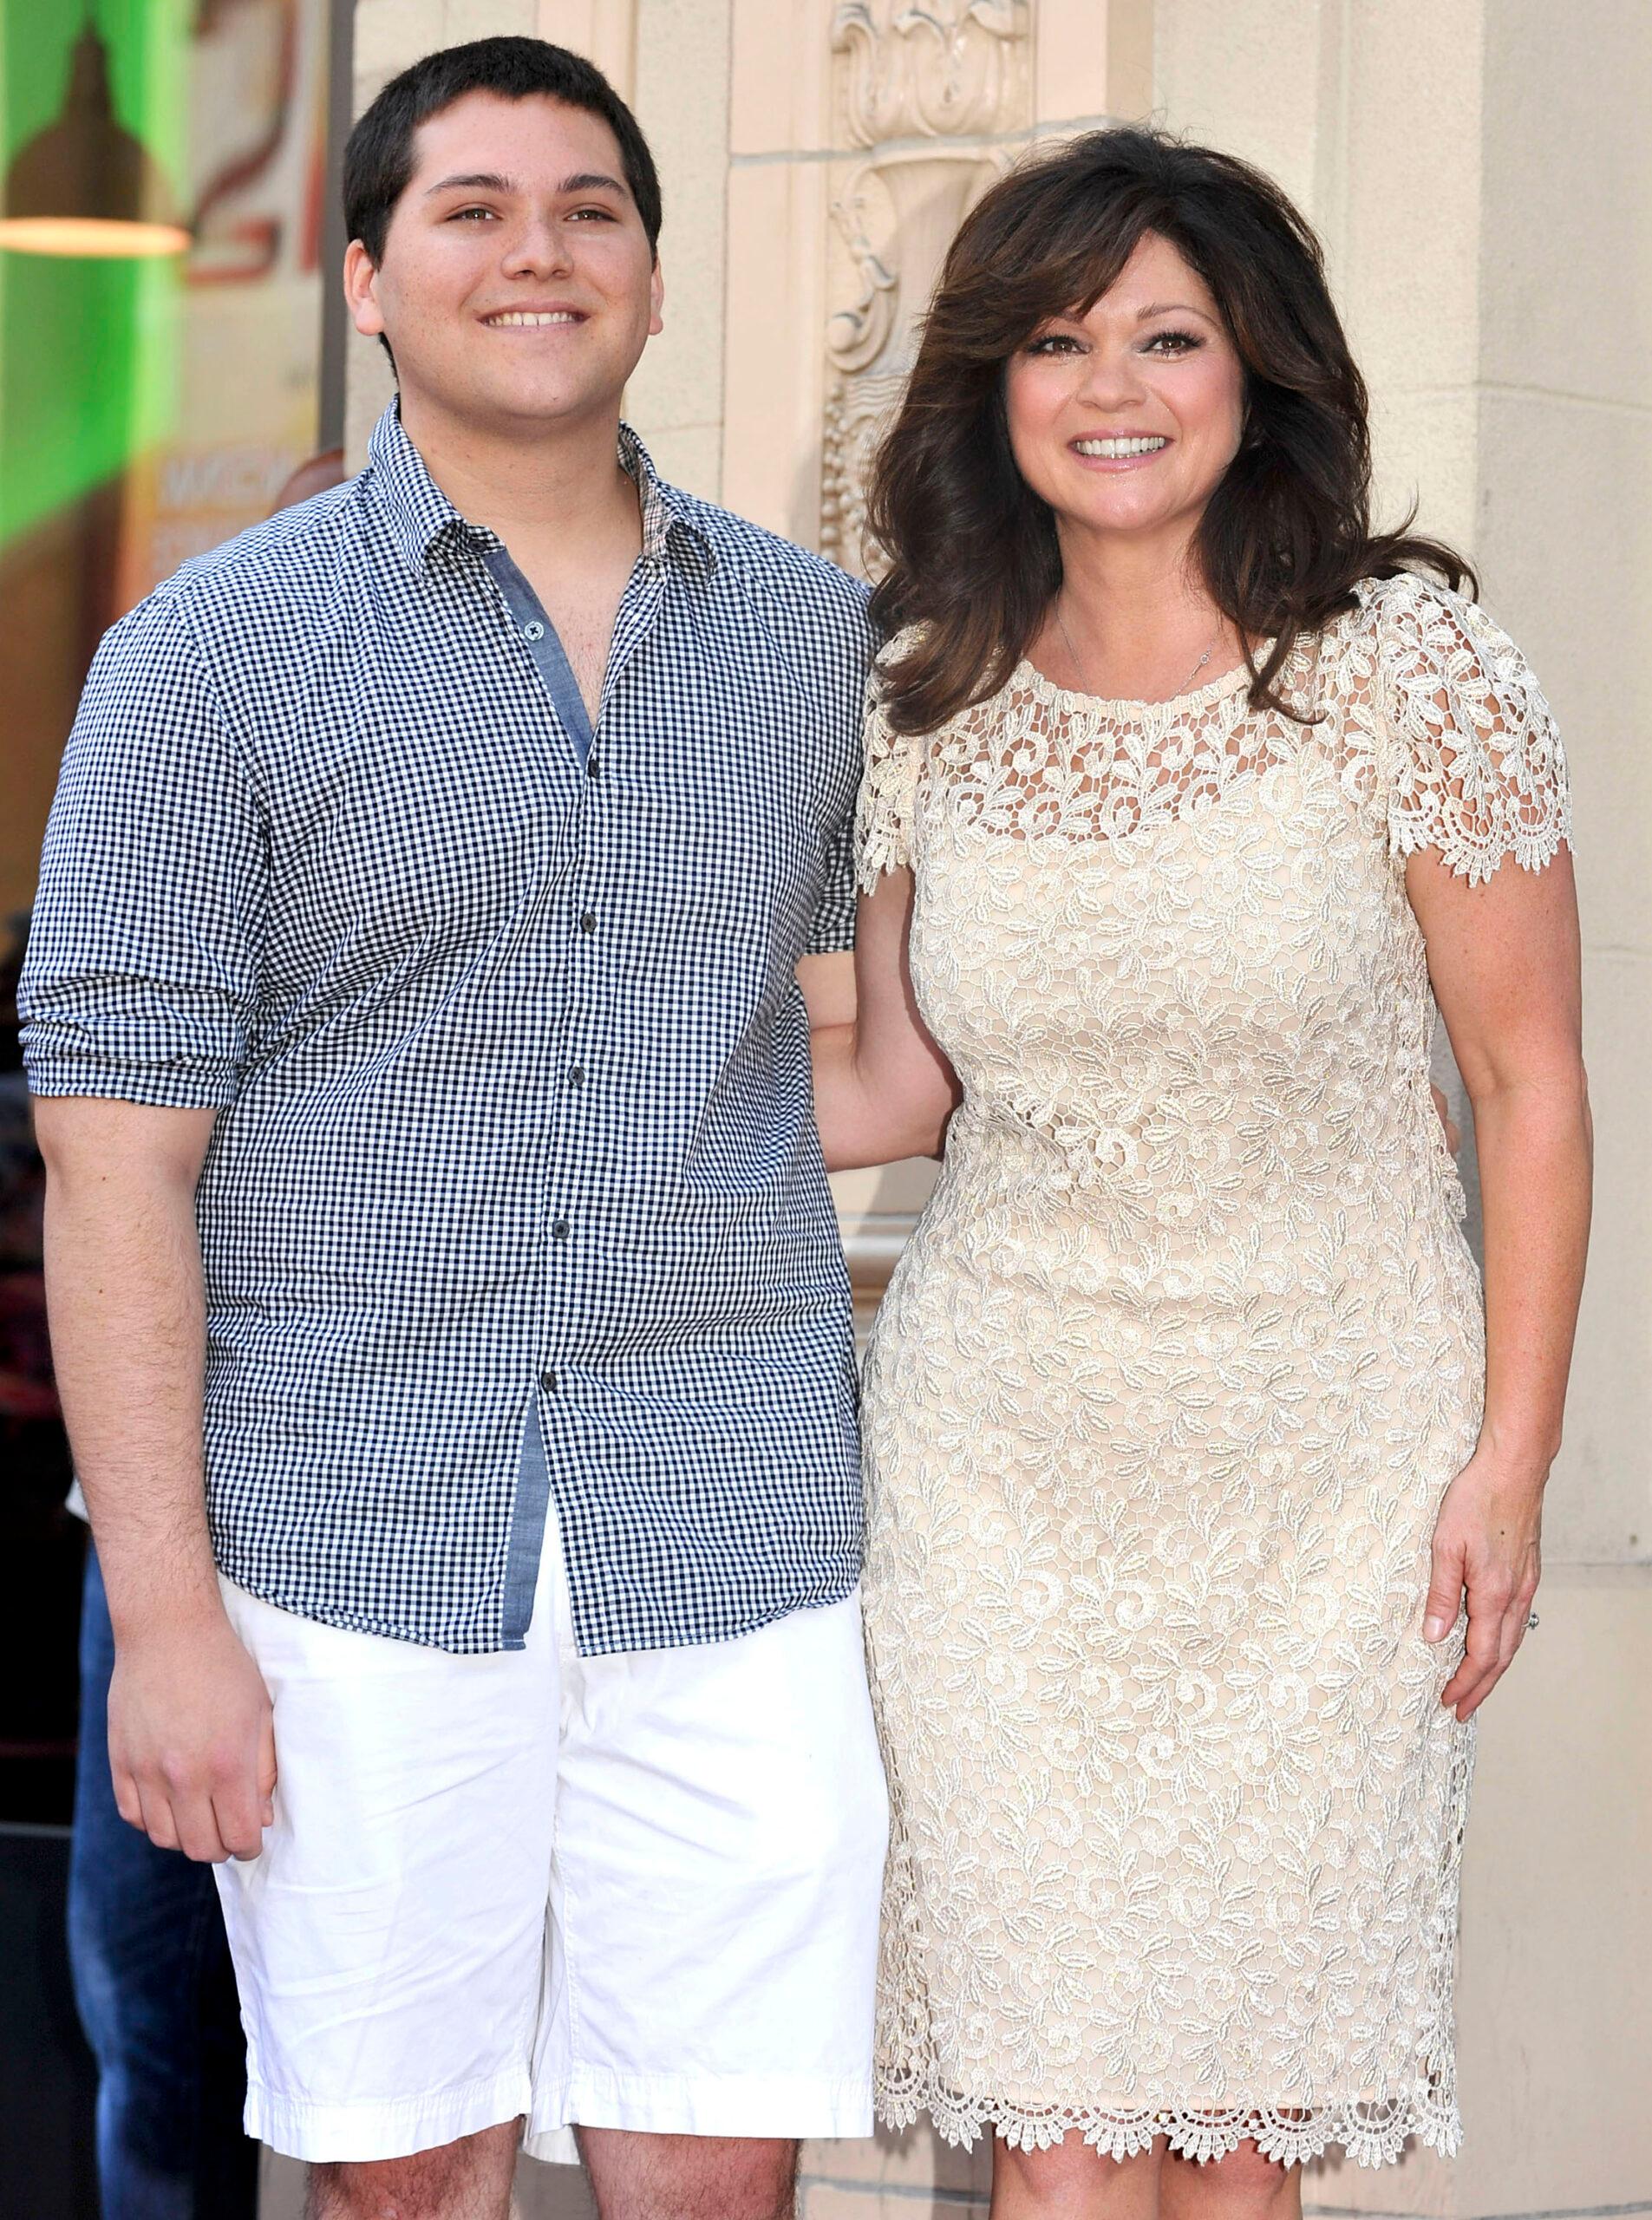 Valerie Bertinelli & son Wolfgang Van Halen at her honoring with star on Hollywood Walk of Fame